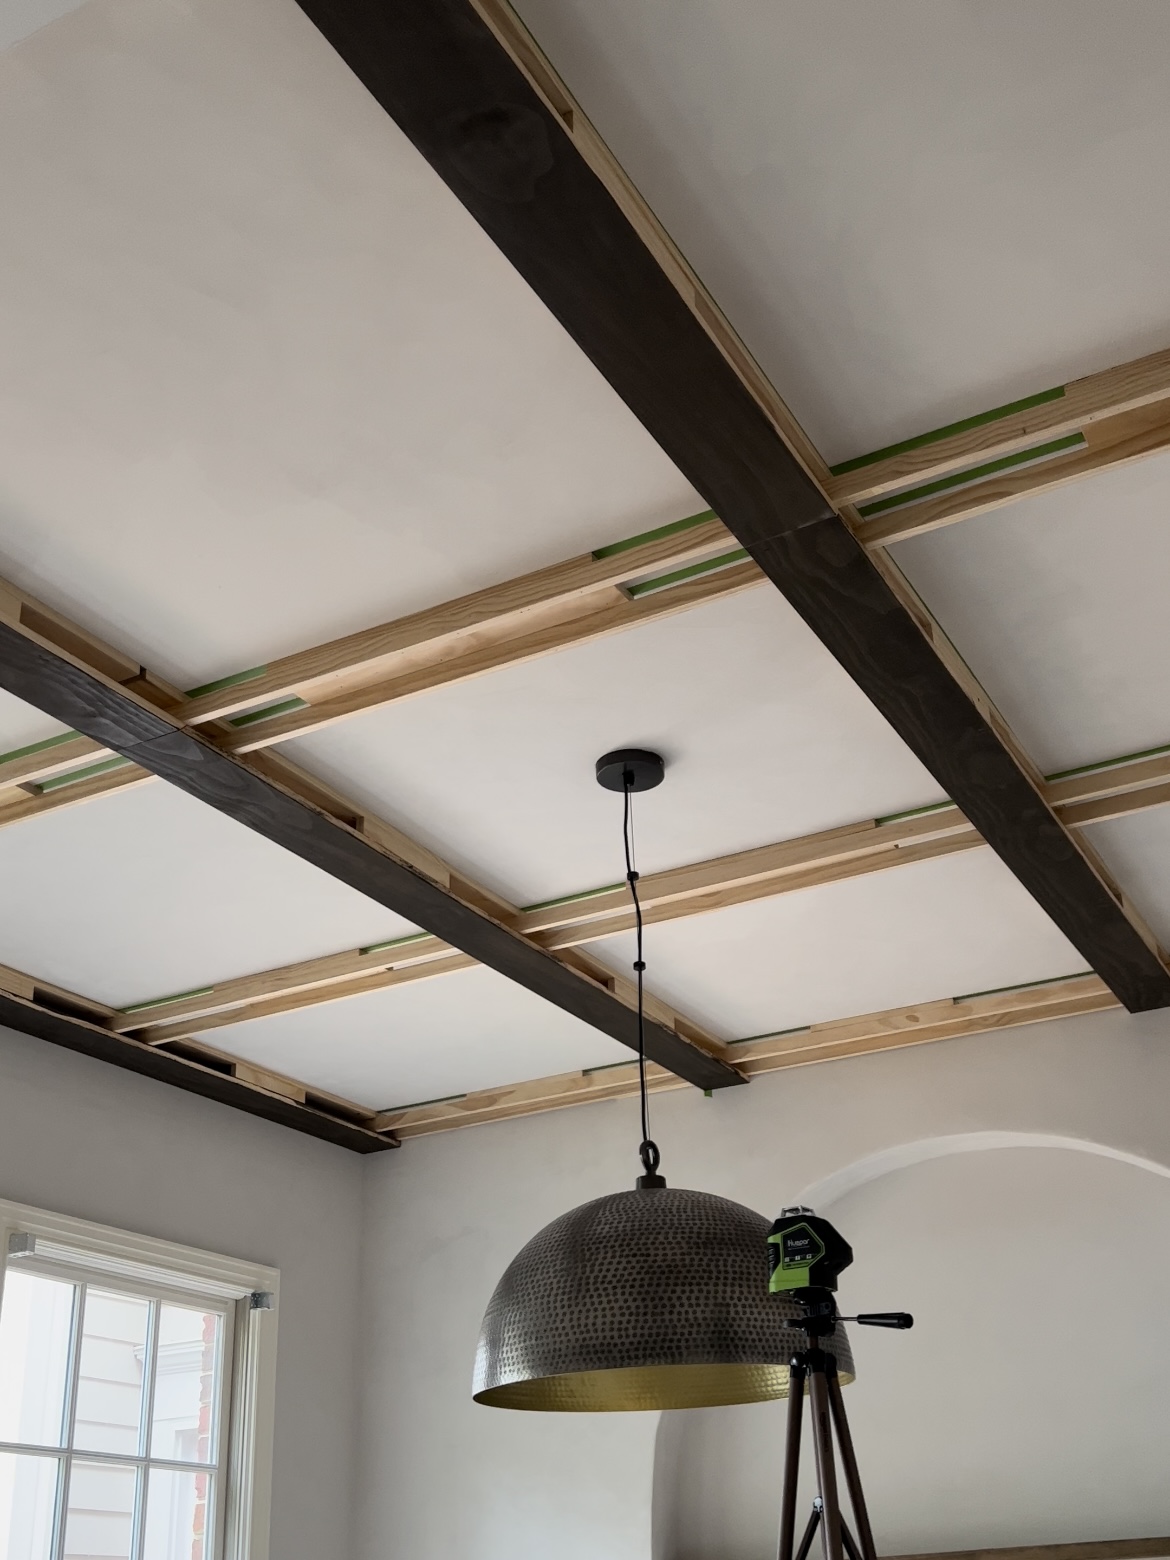 Process photos of installing a coffered ceiling.